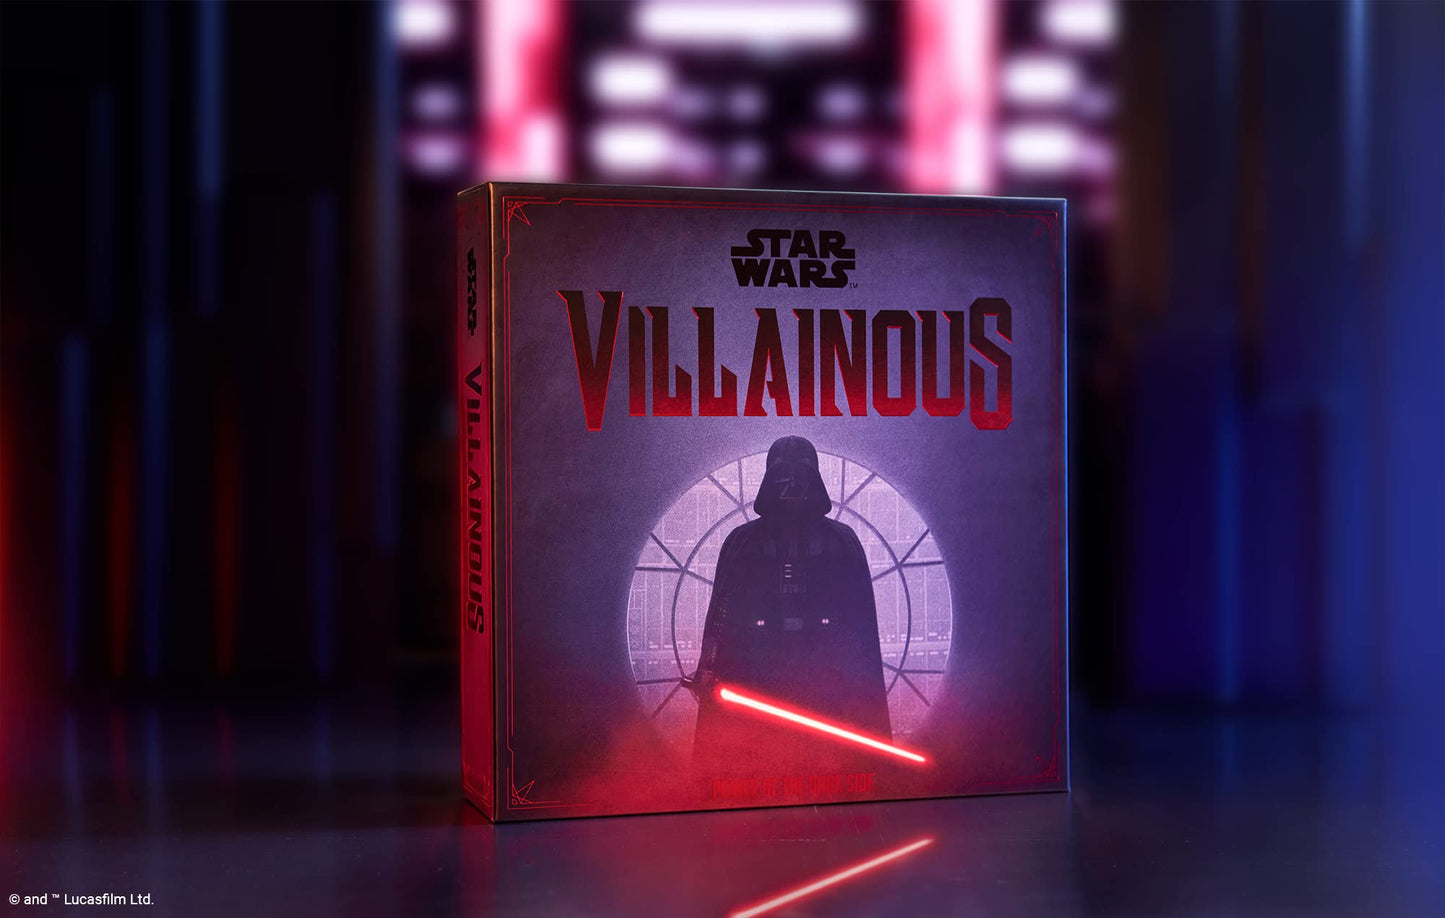 Ravensburger Star Wars Villainous: Power of The Dark Side - Strategy Board Game for Ages 10 &amp; Up, 2 - 4 players